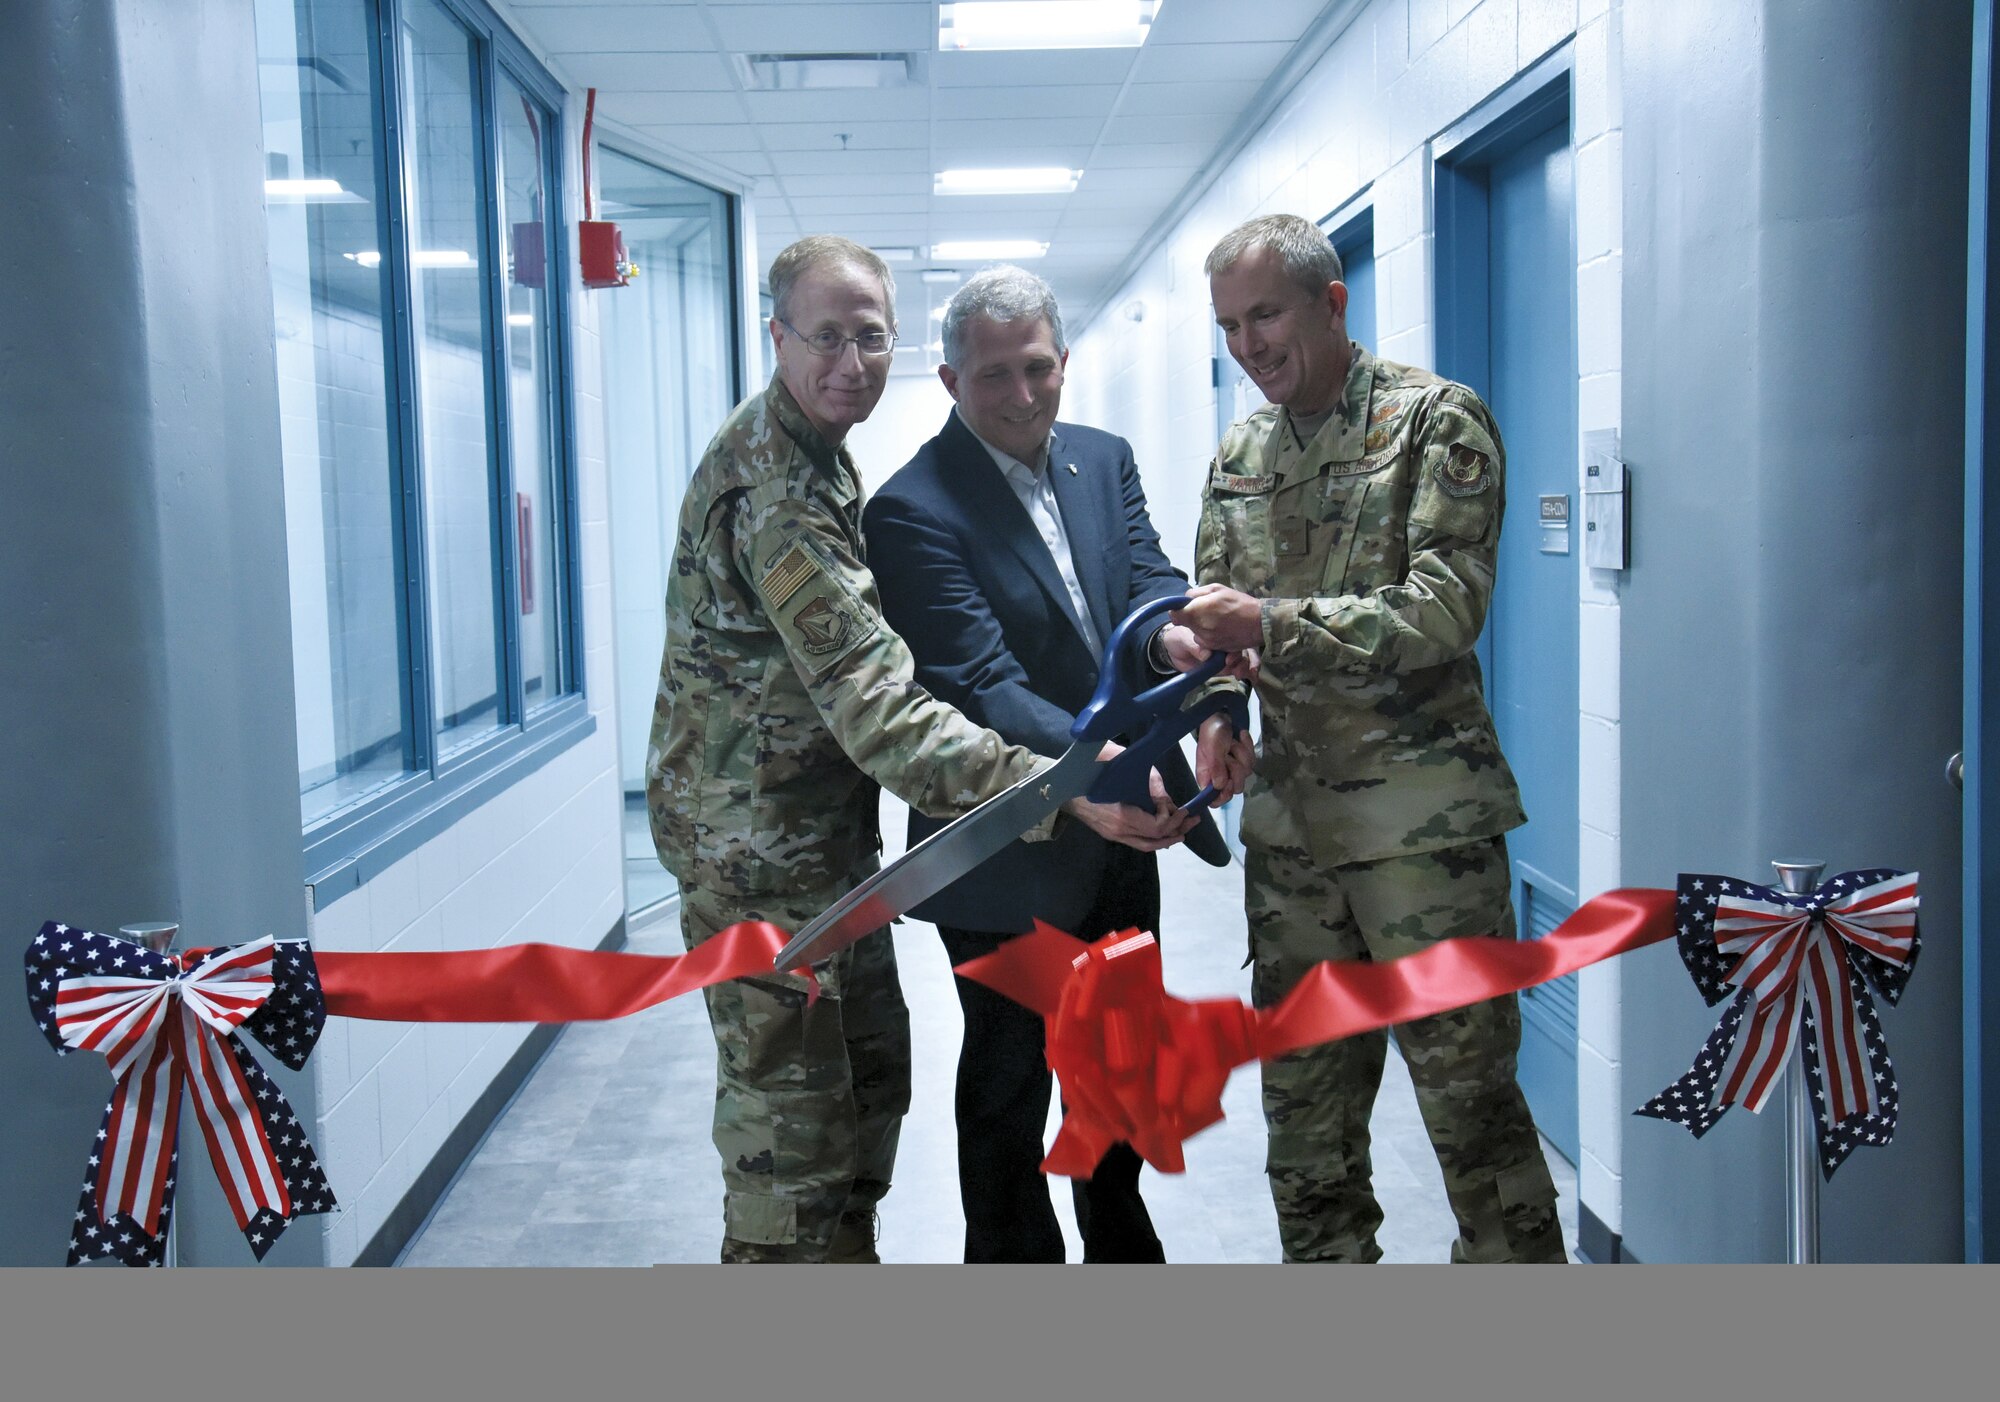 From left to right, AFRL Vice Commander Col. Paul Henderson, Materials and Manufacturing Directorate Chief Scientist Dr. Richard Vaia, and Deputy Director Col. Michael Warner cut the ribbon to open the renovated Materials Characterization Facility at Wright-Patterson Air Force Base. (U.S. Air Force photo/Spencer Deer)